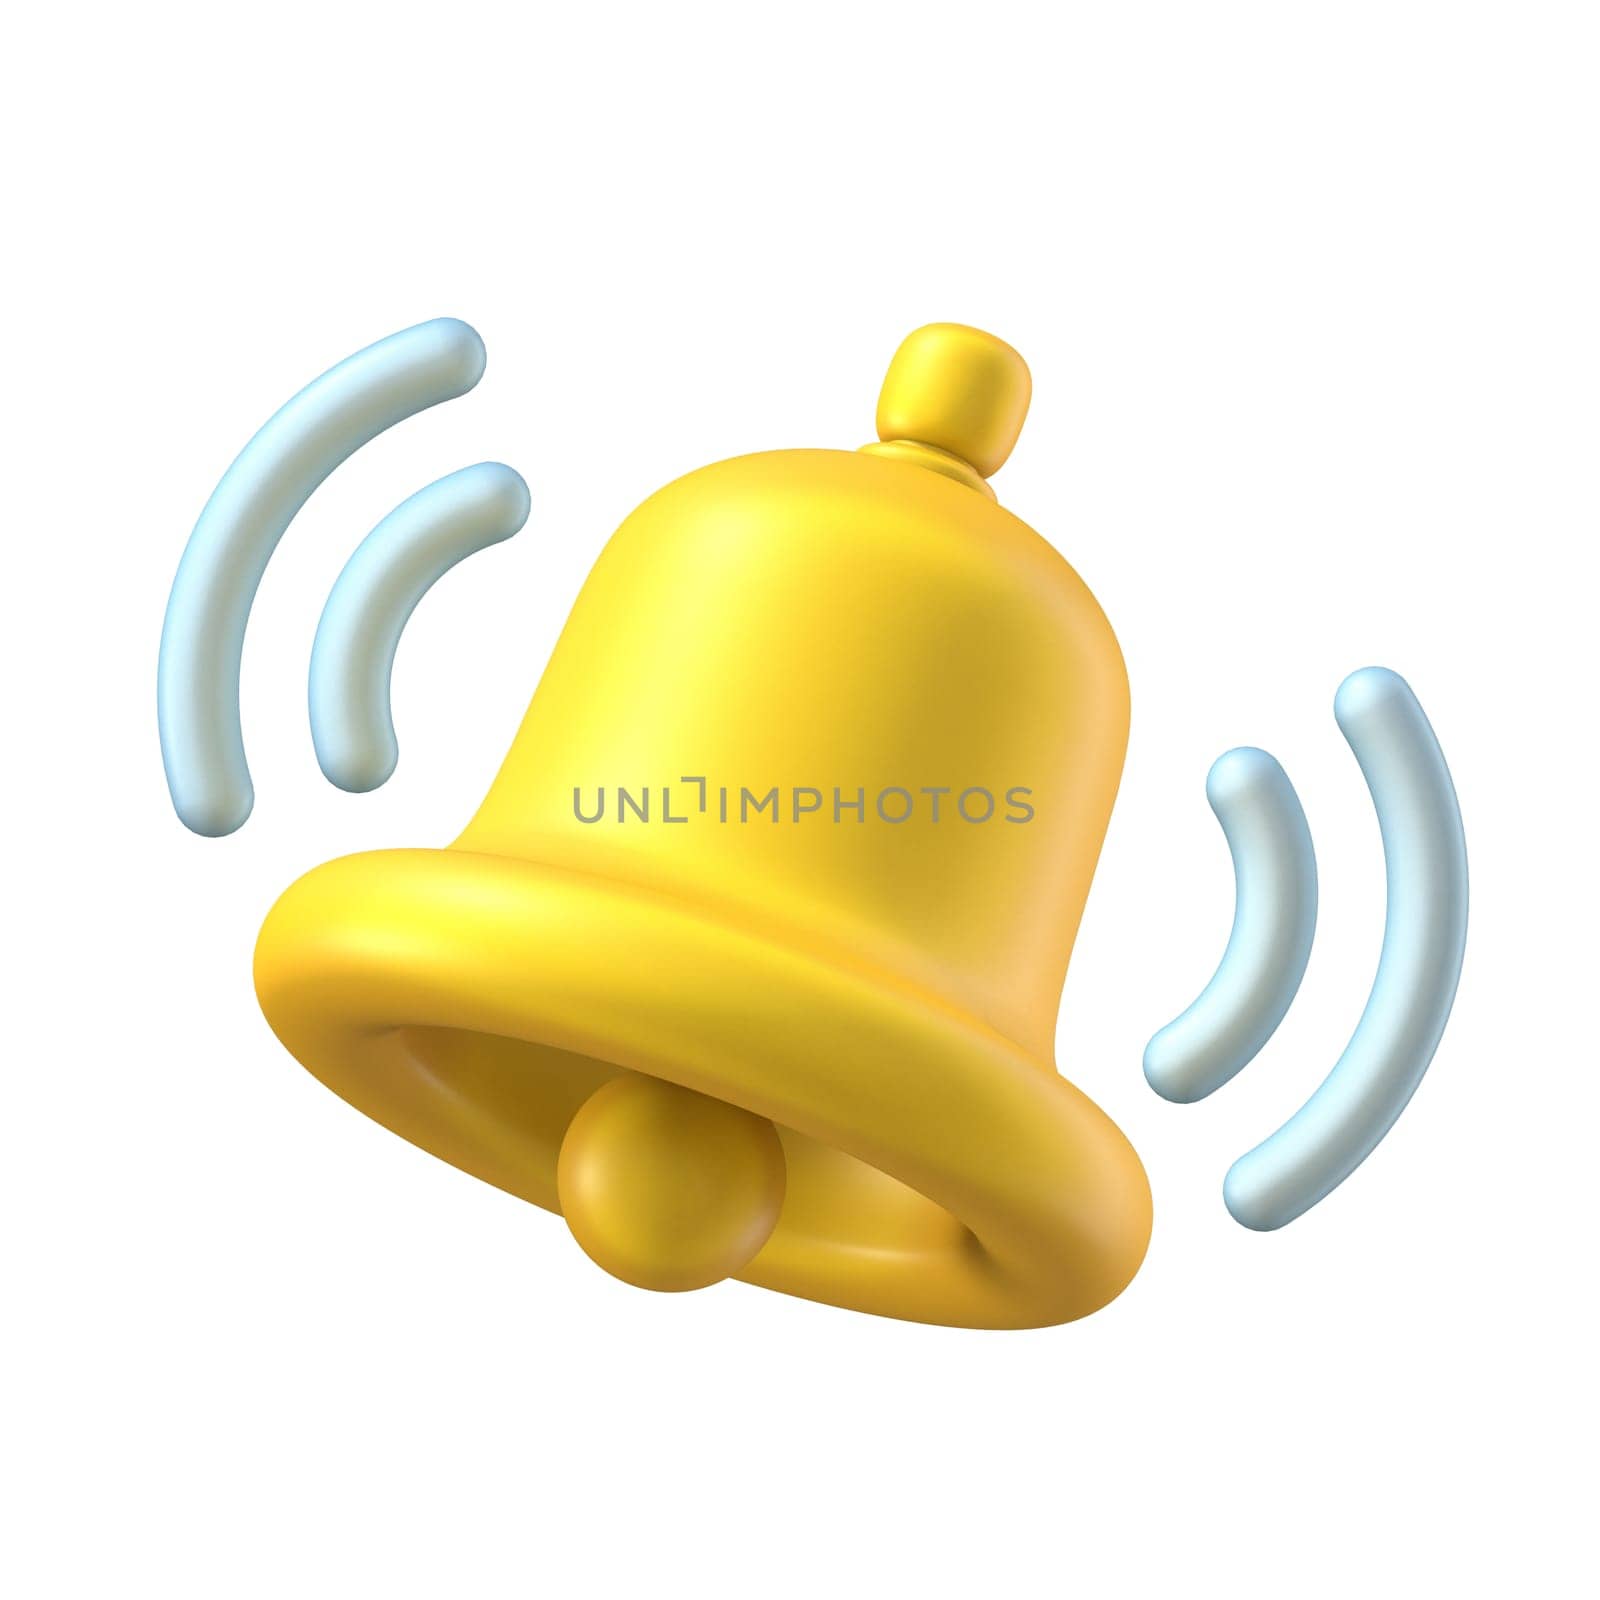 Notification bell with blue waves 3D rendering illustration isolated on white background